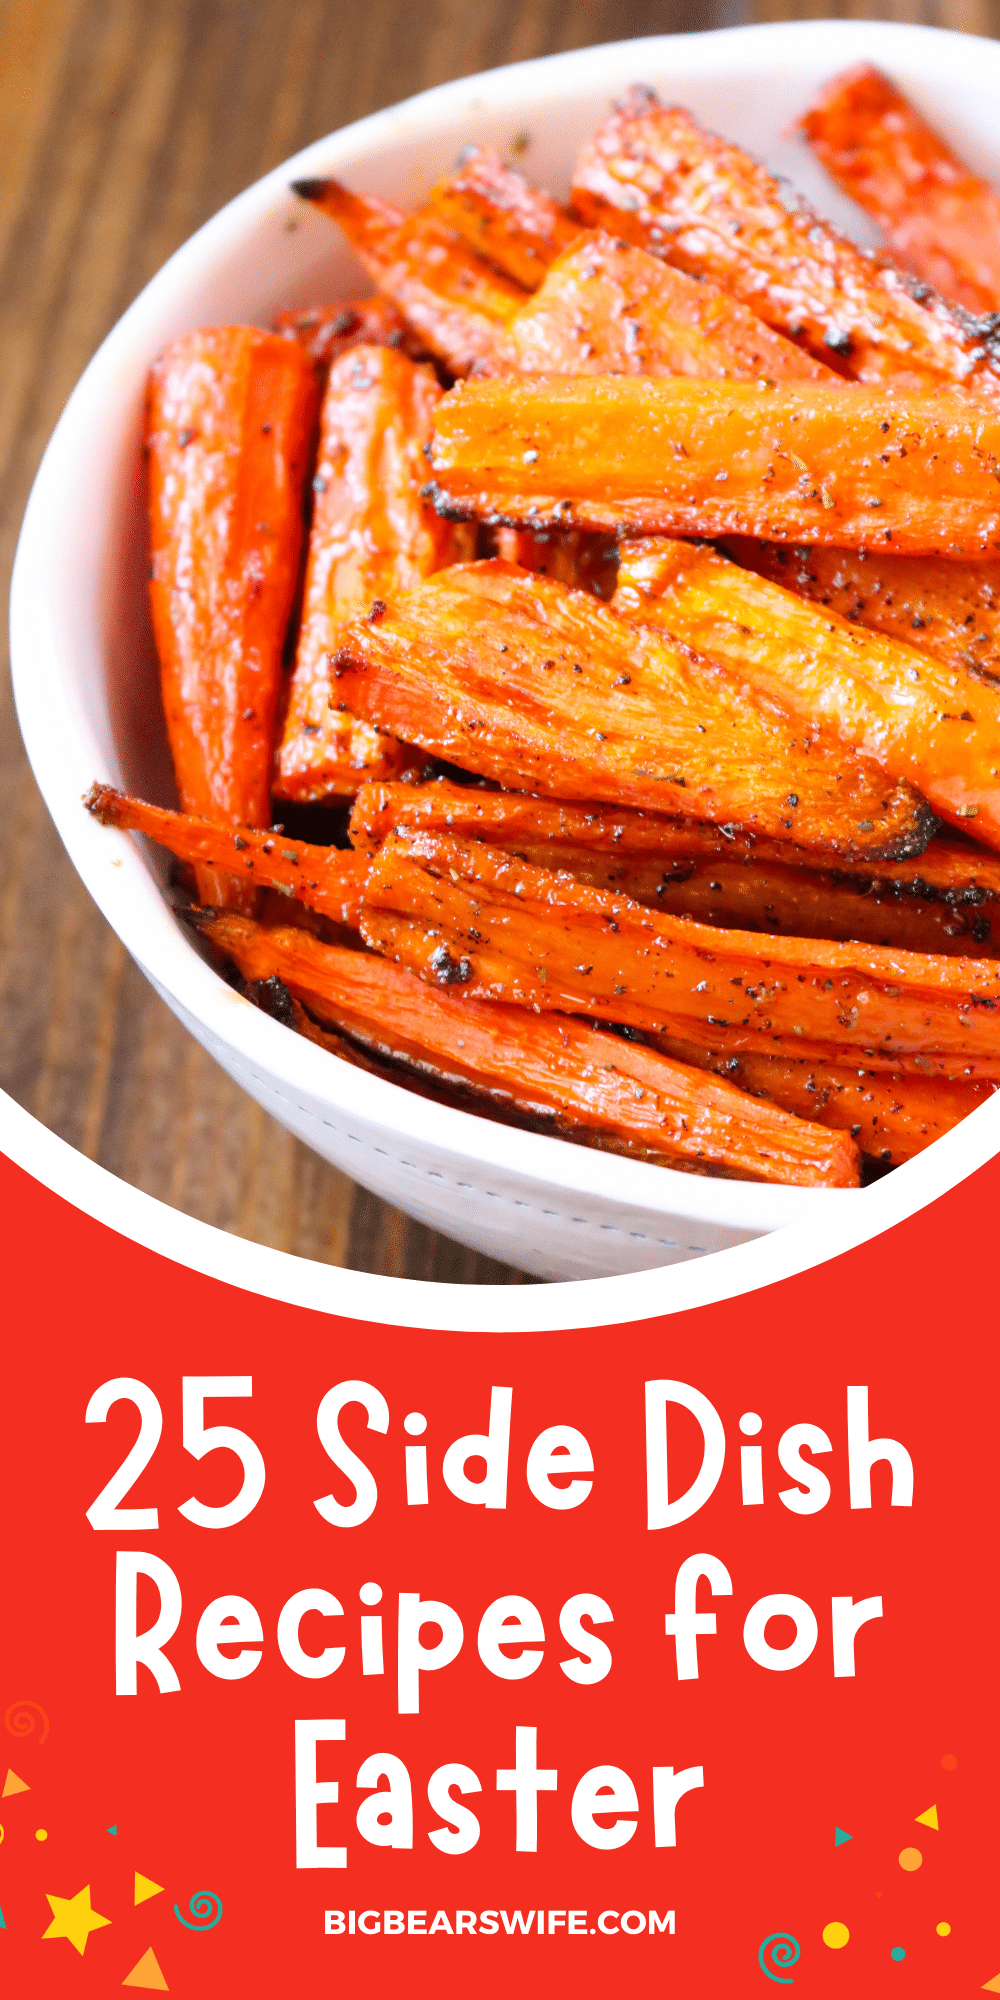 While we love a good ham recipes for Easter, the side dishes are our favorite part of this holiday meal! Looking for a old fashioned southern favorite or a lighter option to grace the Easter lunch table this year? Take a look at these 25 fantastic side dish recipes for Easter that are ready to hop their way onto your Easter table!  via @bigbearswife